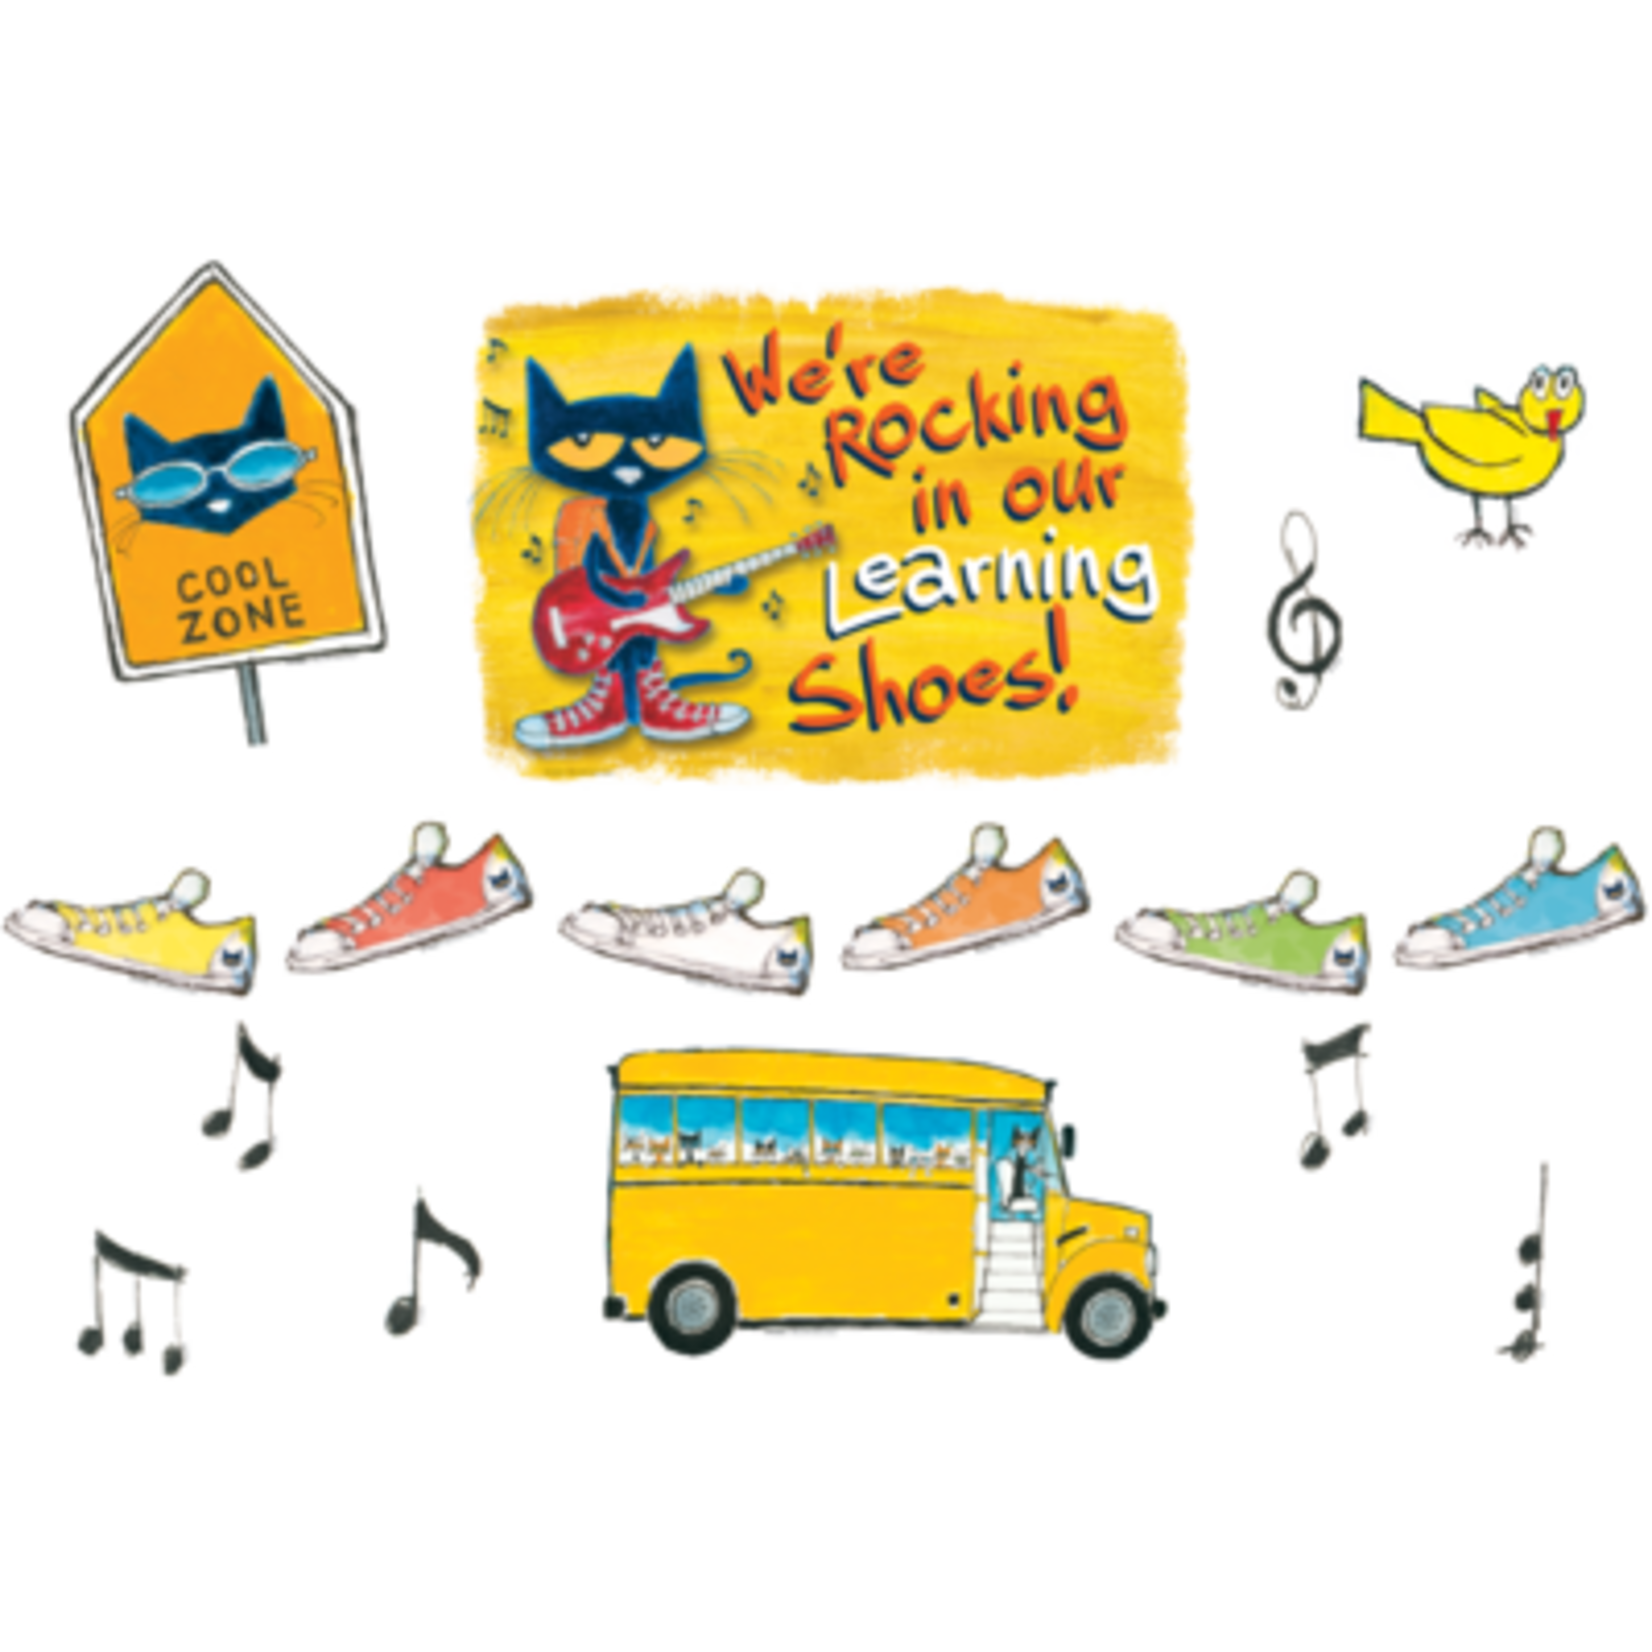 TEACHER CREATED RESOURCES Pete the Cat We're Rocking in Our Learning Shoes Bulletin Board